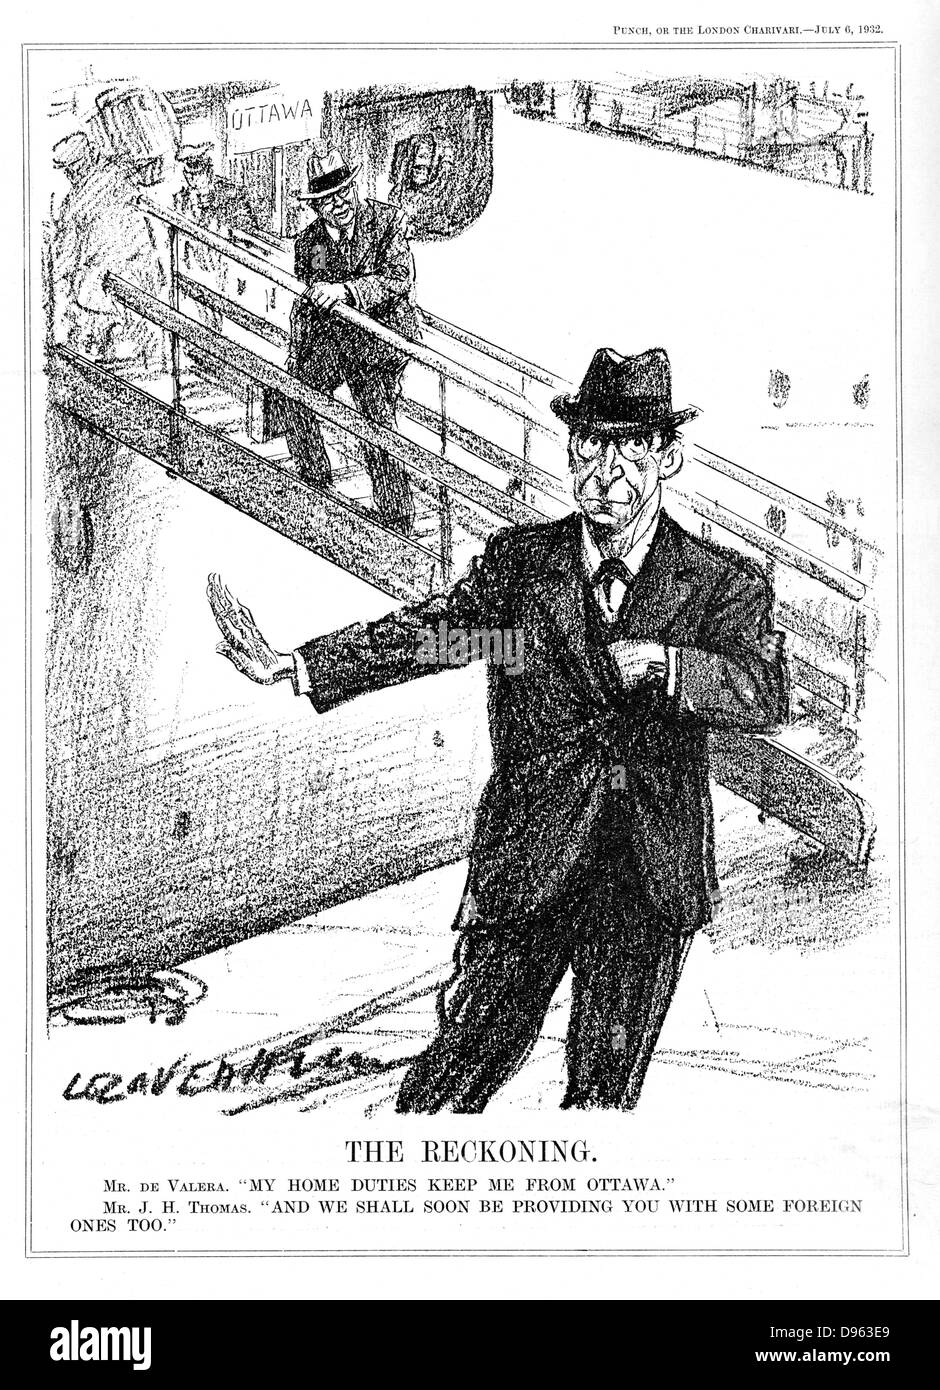 Eamon De Valera (1882-1975) American-born Irish statesman, declining the opportunity to attend the Ottawa Conference on tarriffs because oh his duties at home in the Irish Free State, where he had just come into power,. Cartoon by L Ravenhill from 'Punch' (London, 6 July 1932.) Stock Photo